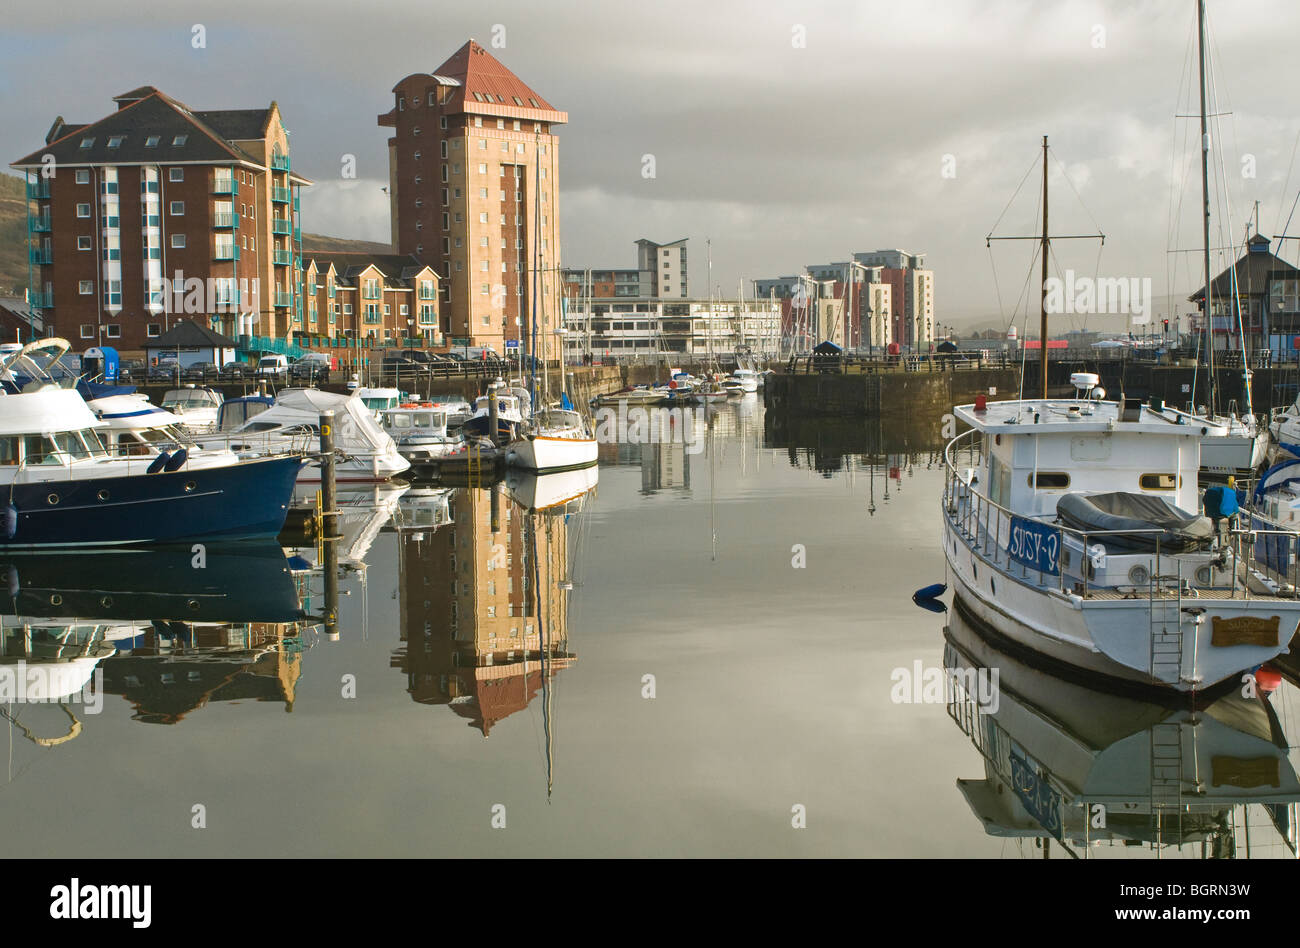 Swansea Marina, a new development around the old Swansea docks in south Wales Stock Photo